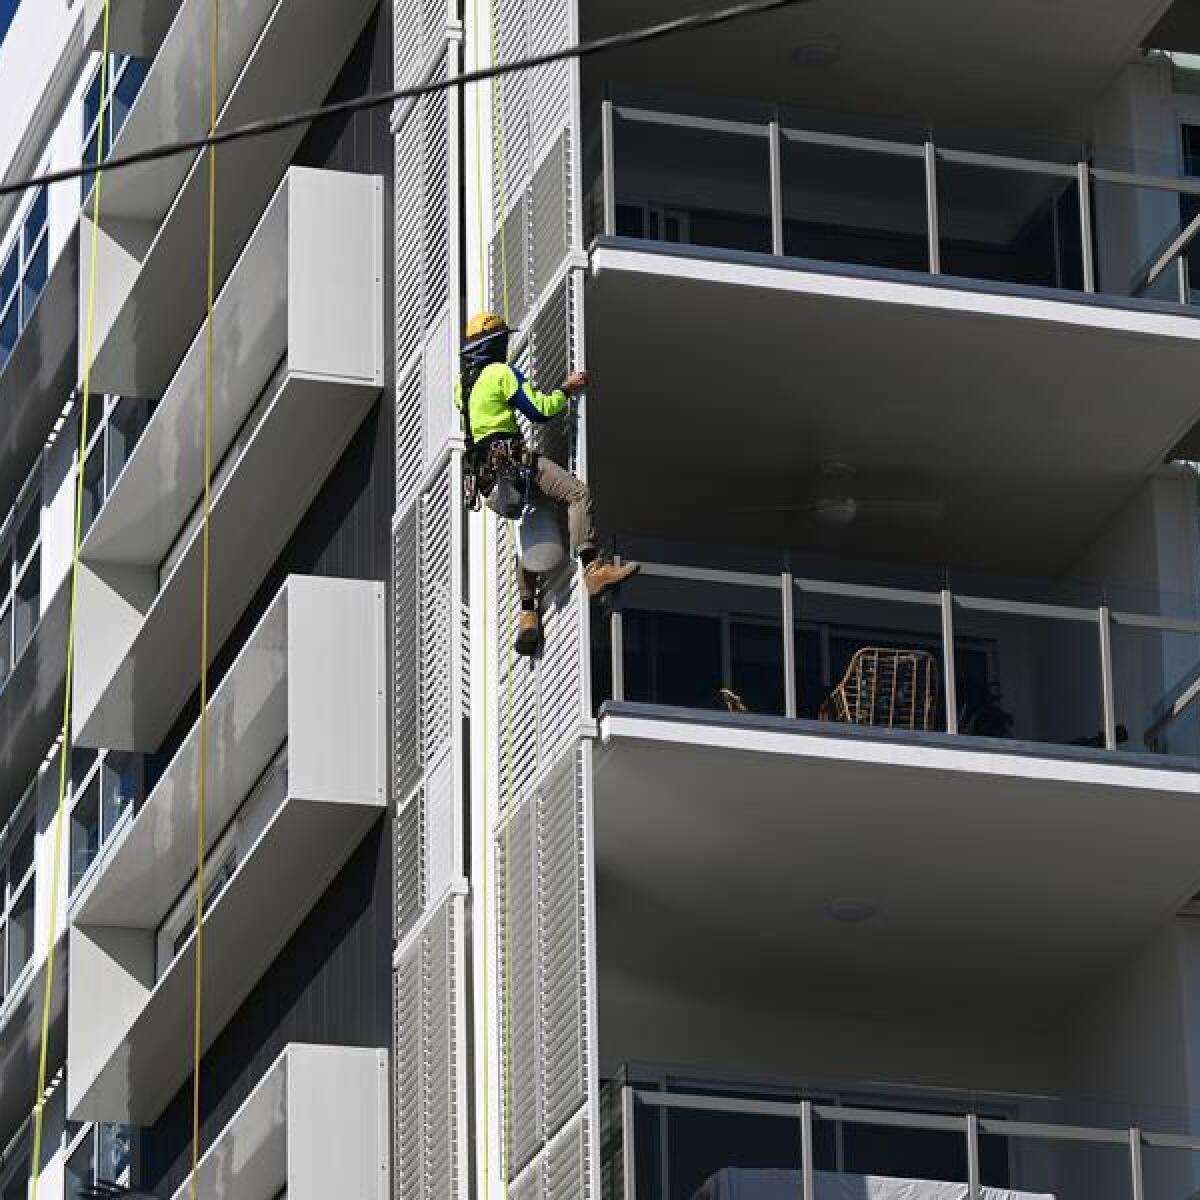 A construction worker is seen working on the side of a new apartment